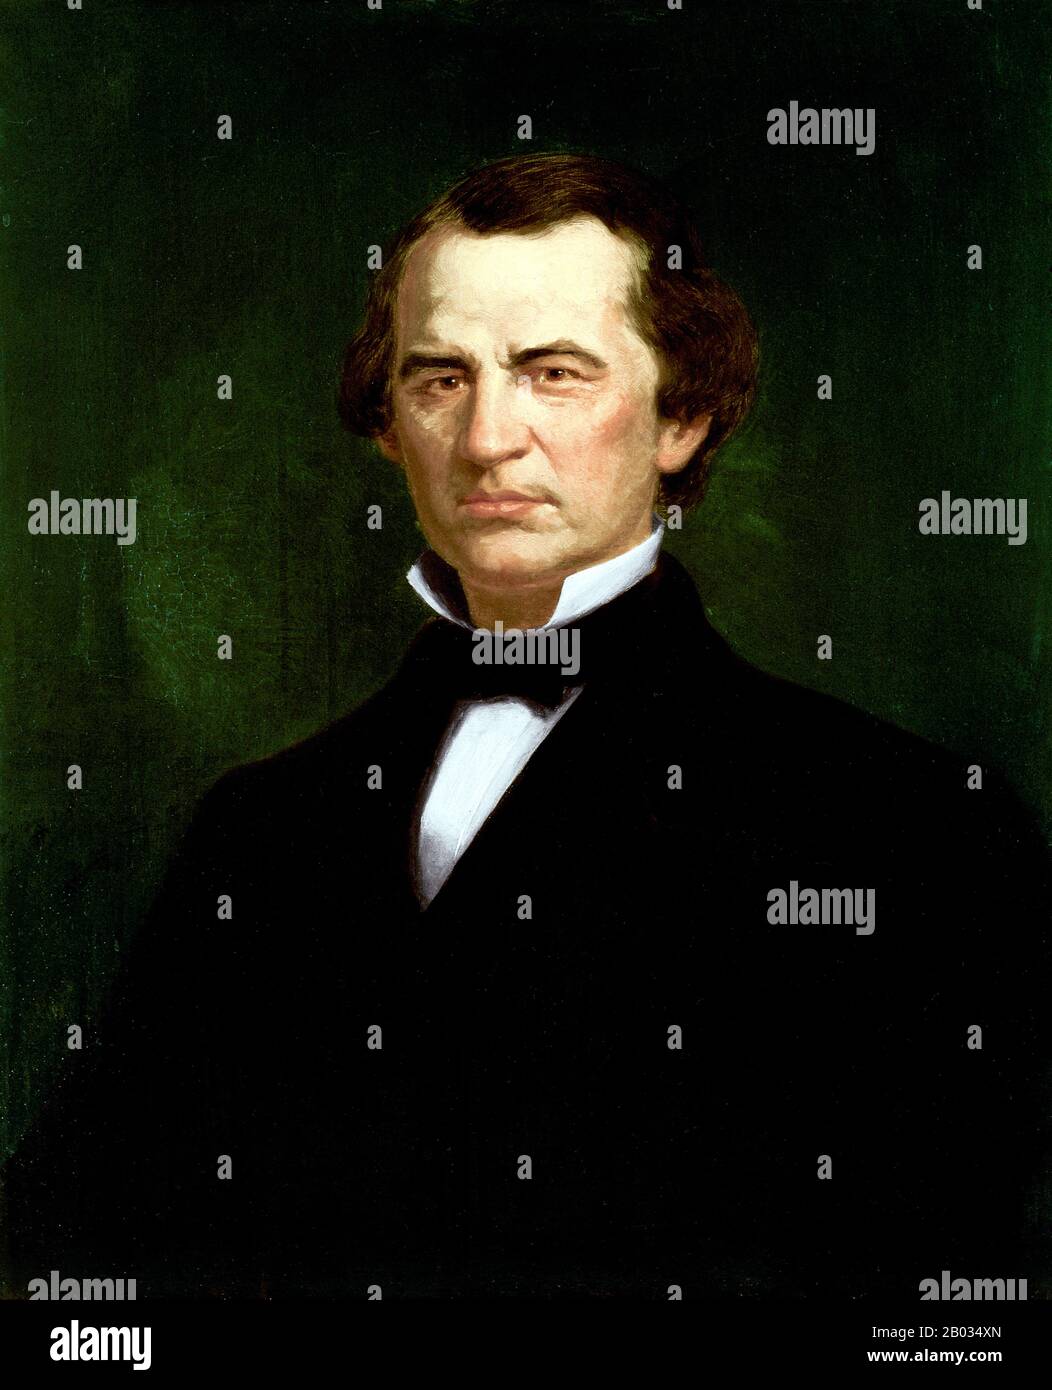 Andrew Johnson (December 29, 1808 – July 31, 1875) was the 17th President of the United States, serving from 1865 to 1869. Johnson became president as he was vice president at the time of the assassination of Abraham Lincoln. A Democrat who ran with Lincoln on the National Union ticket, Johnson came to office as the Civil War concluded.  The new president favored quick restoration of the seceded states to the Union. His plans did not give protection to the former slaves, and he came into conflict with the Republican-dominated Congress, culminating in his impeachment by the House of Representat Stock Photo